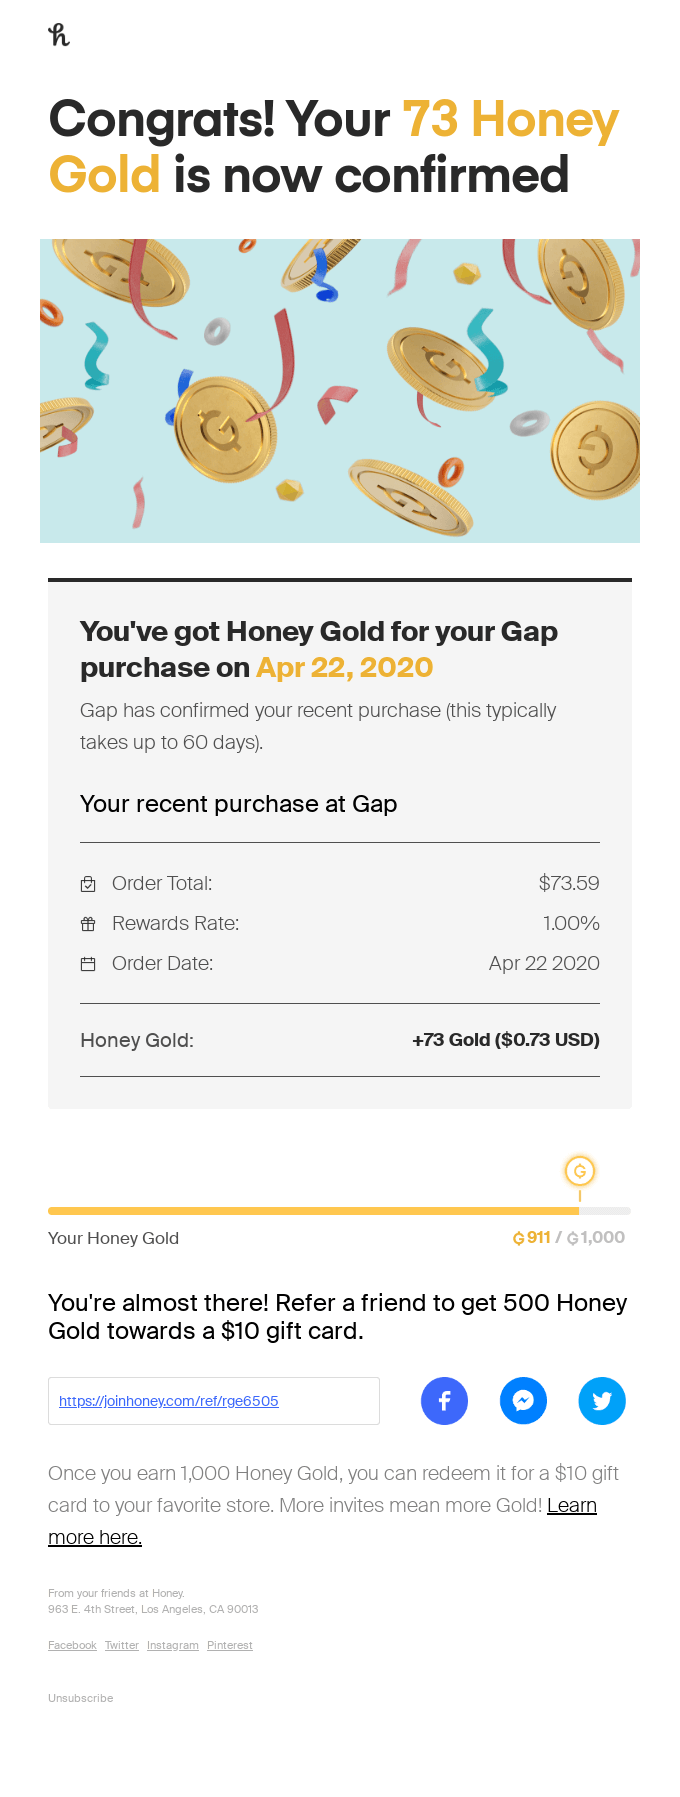 Good news! Your 73 Honey Gold from Gap has been confirmed!